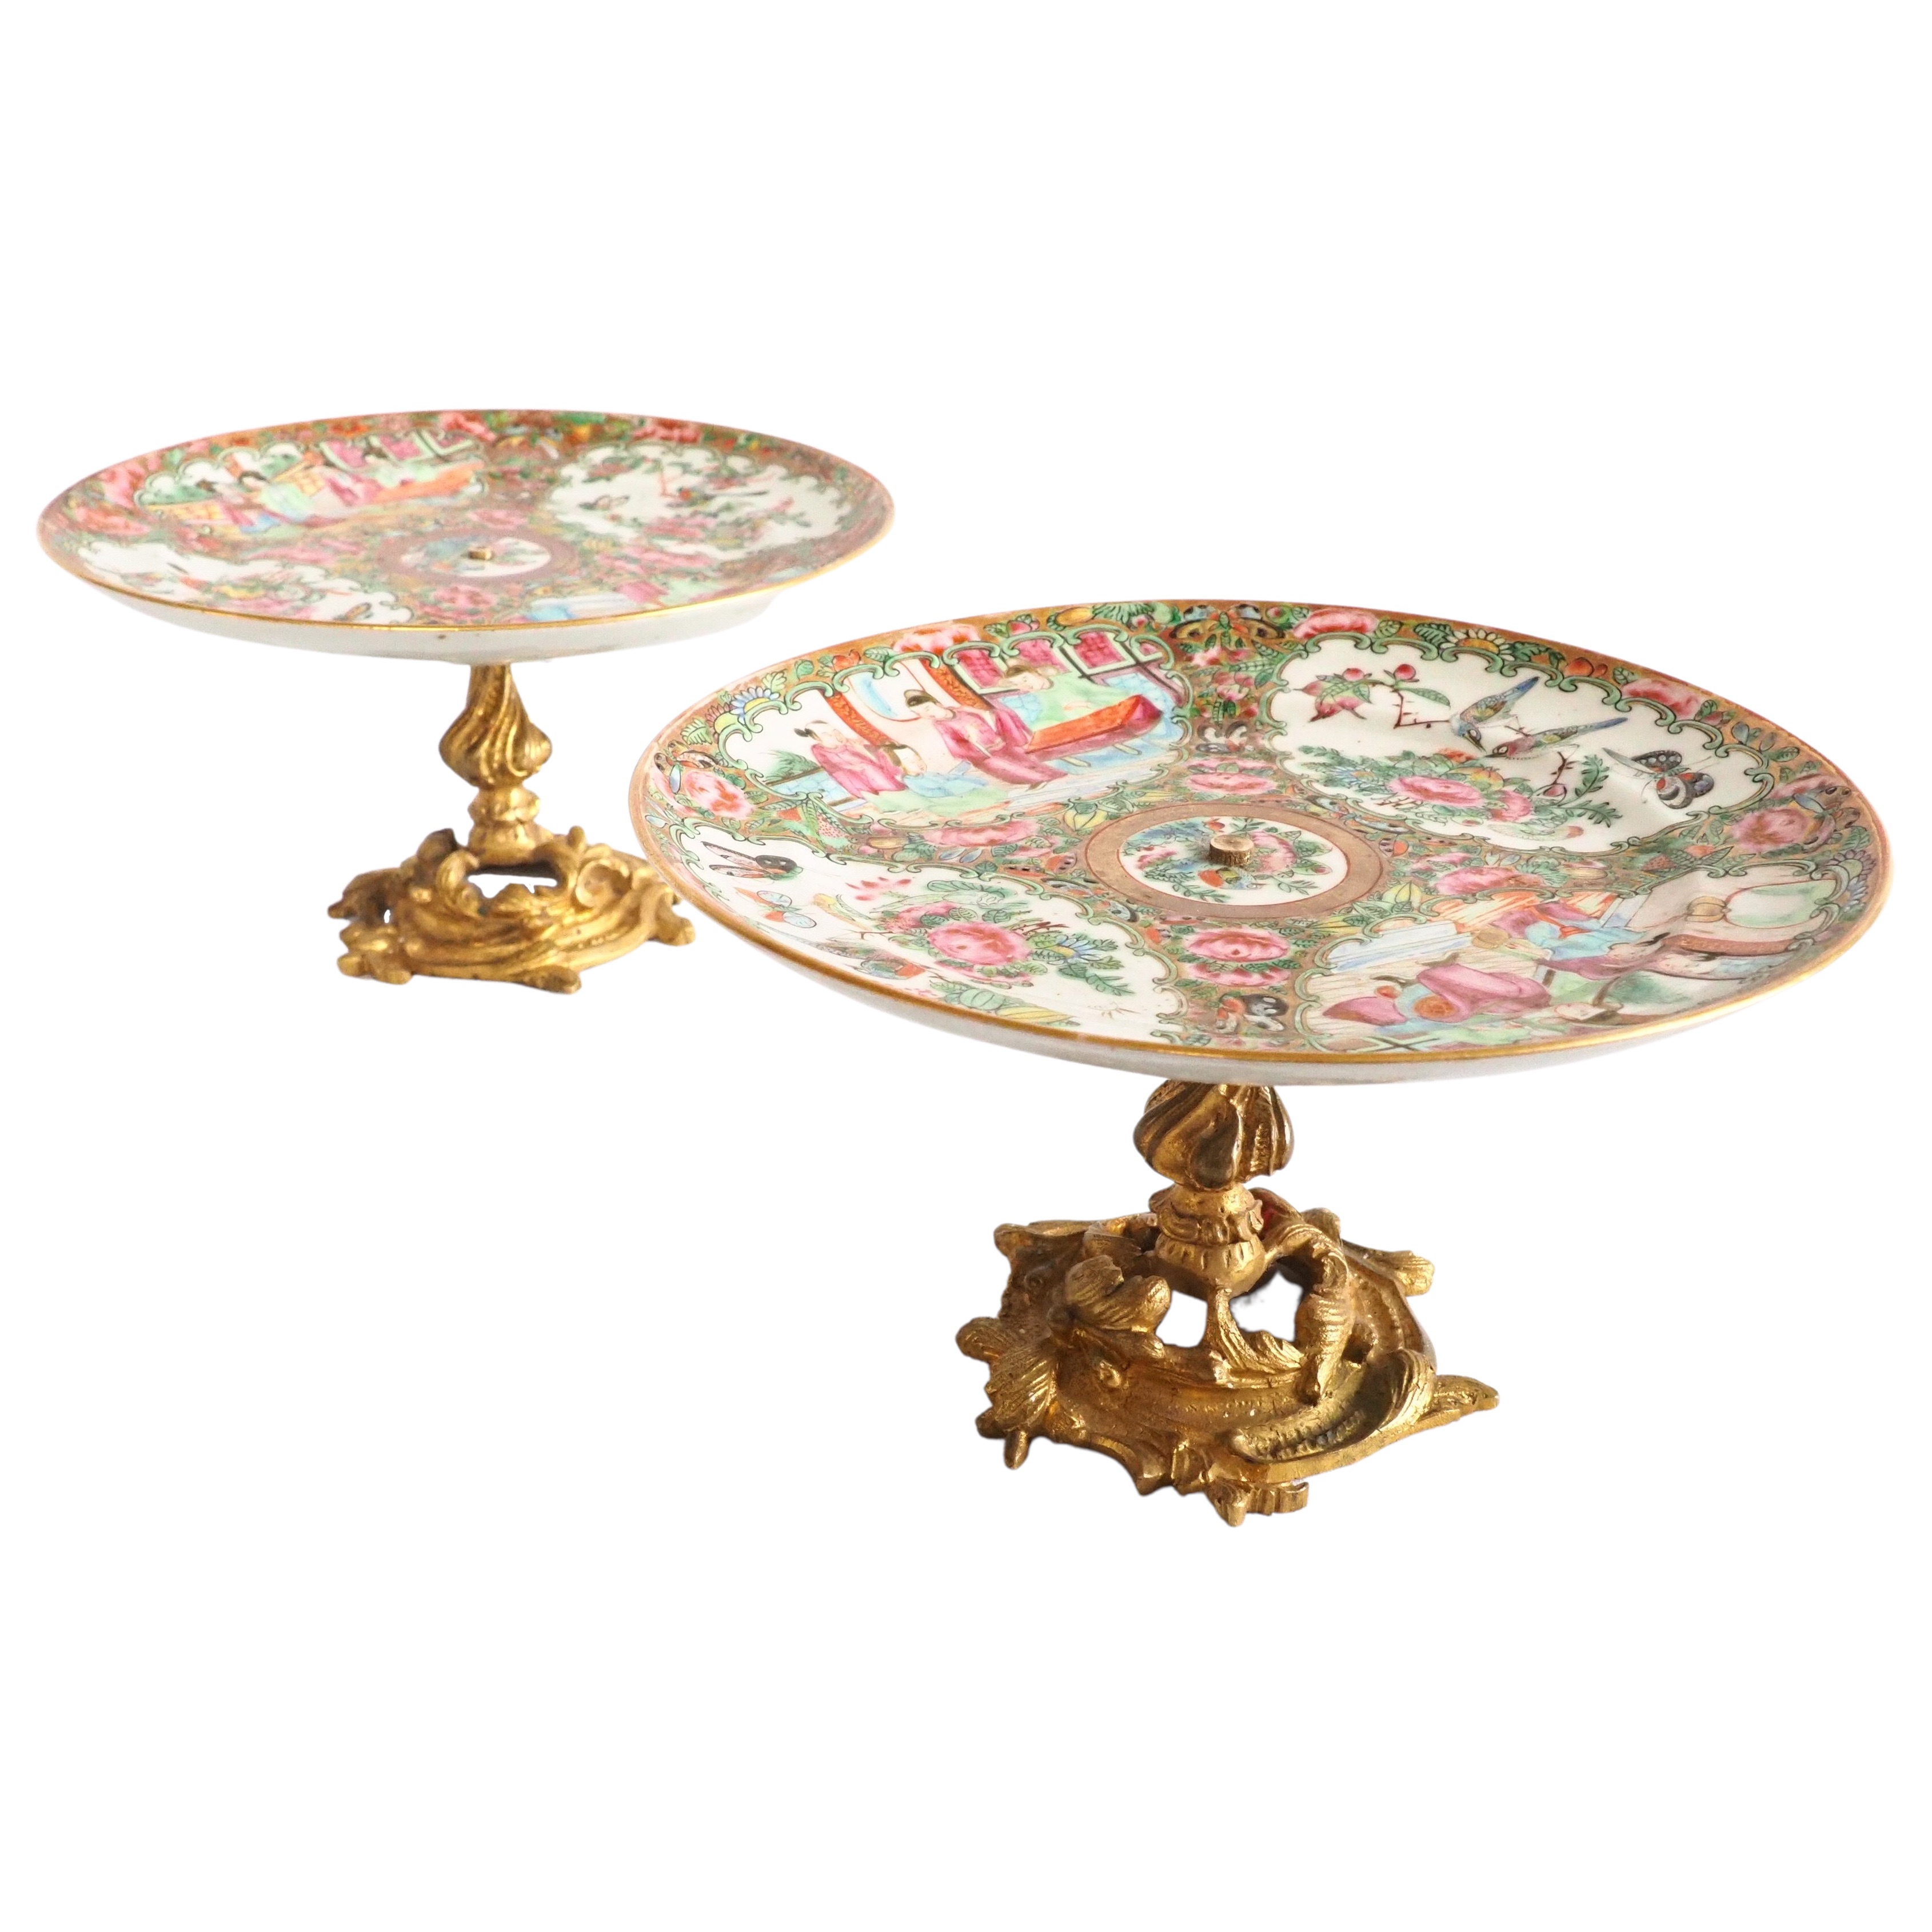 Pair of Canton porcelain plates / dishes, China, gilt bronze frame, 19th century production